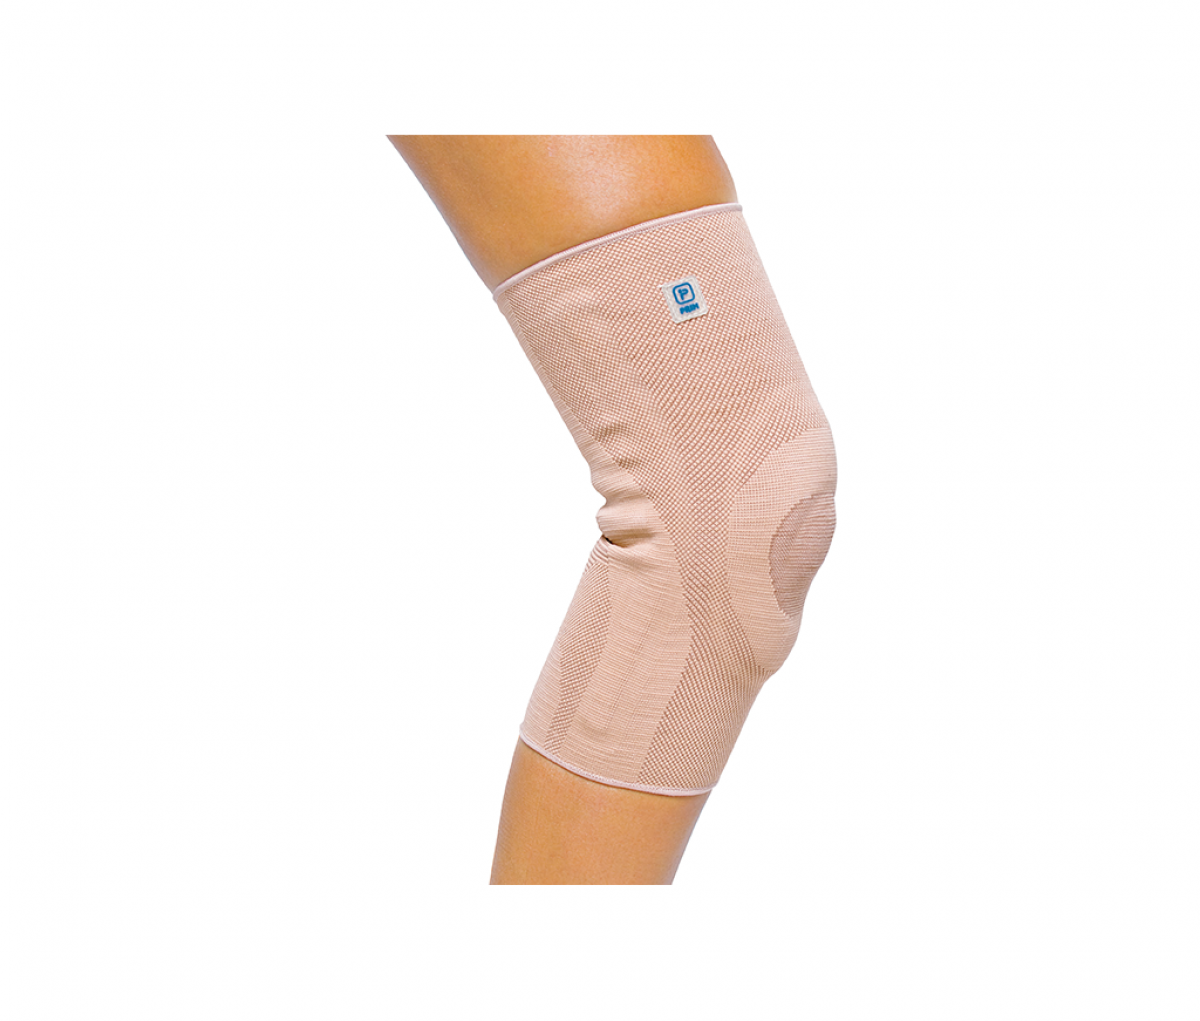 AQTIVO KNEE BRACE WITH SILICONE INSERT AND STAYS - XL P701BG